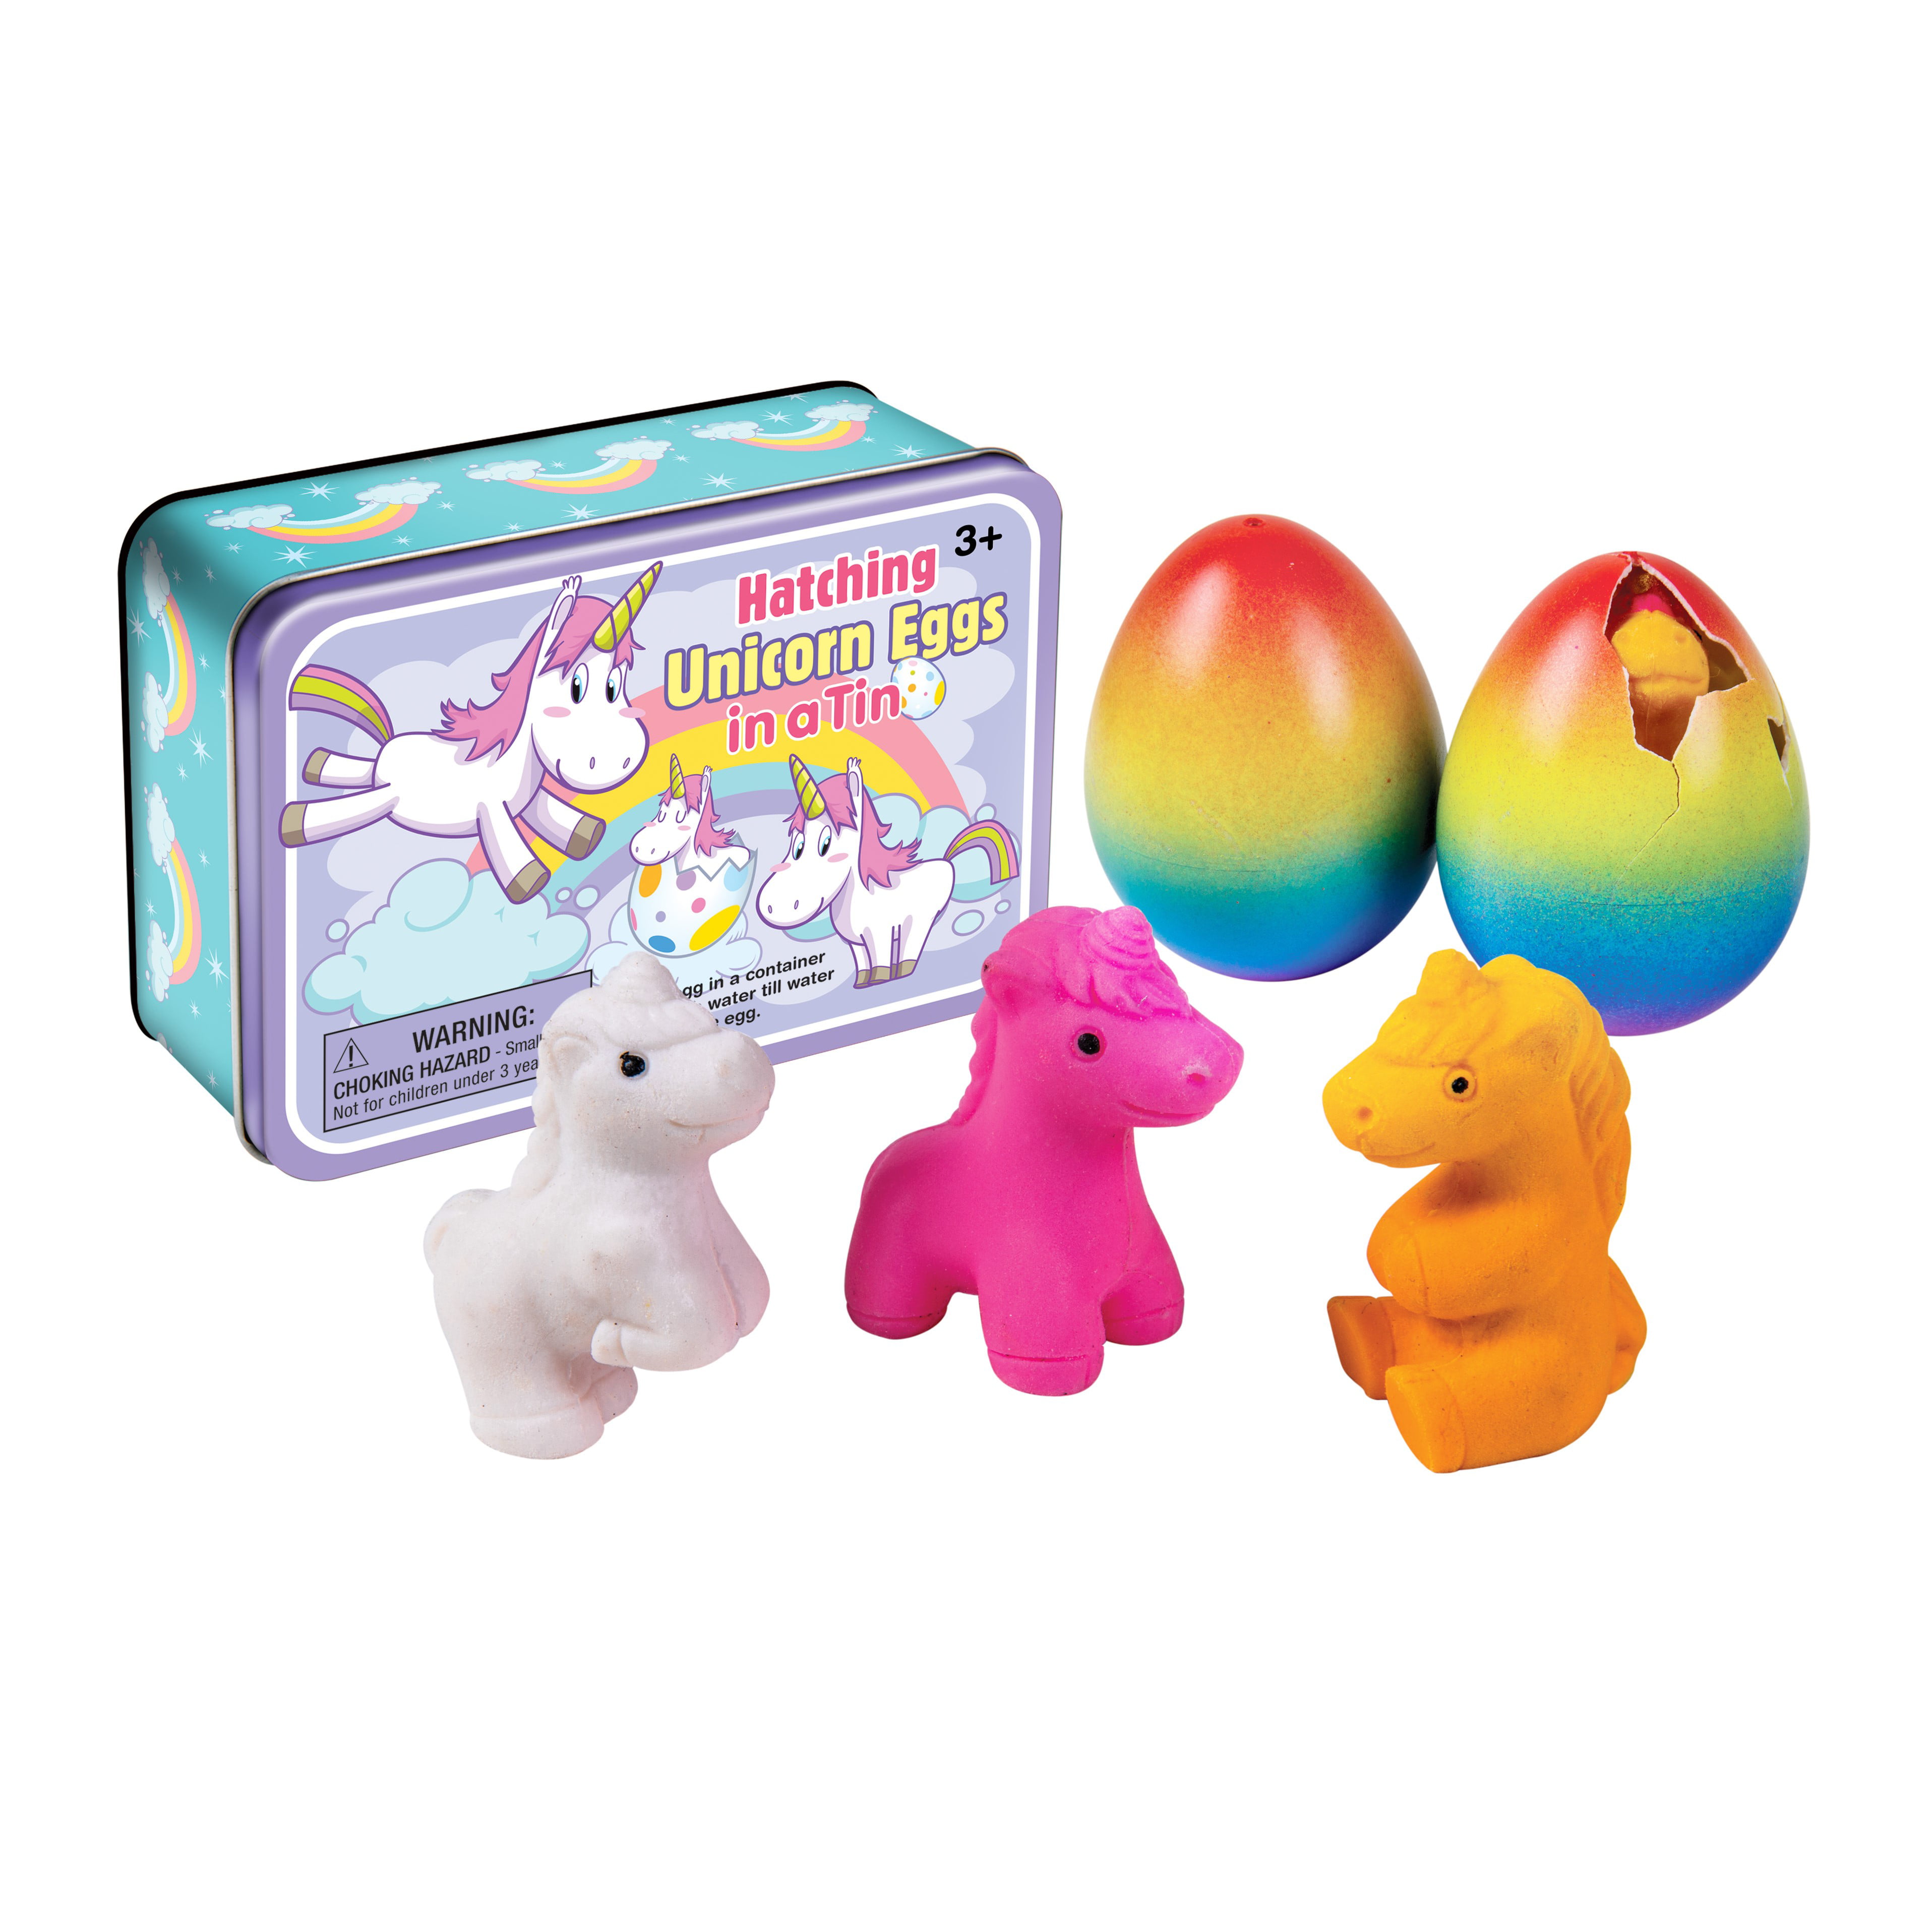 Hatchable Unicorn Egg Toy to Grow a Baby Unicorn Hatches in Water